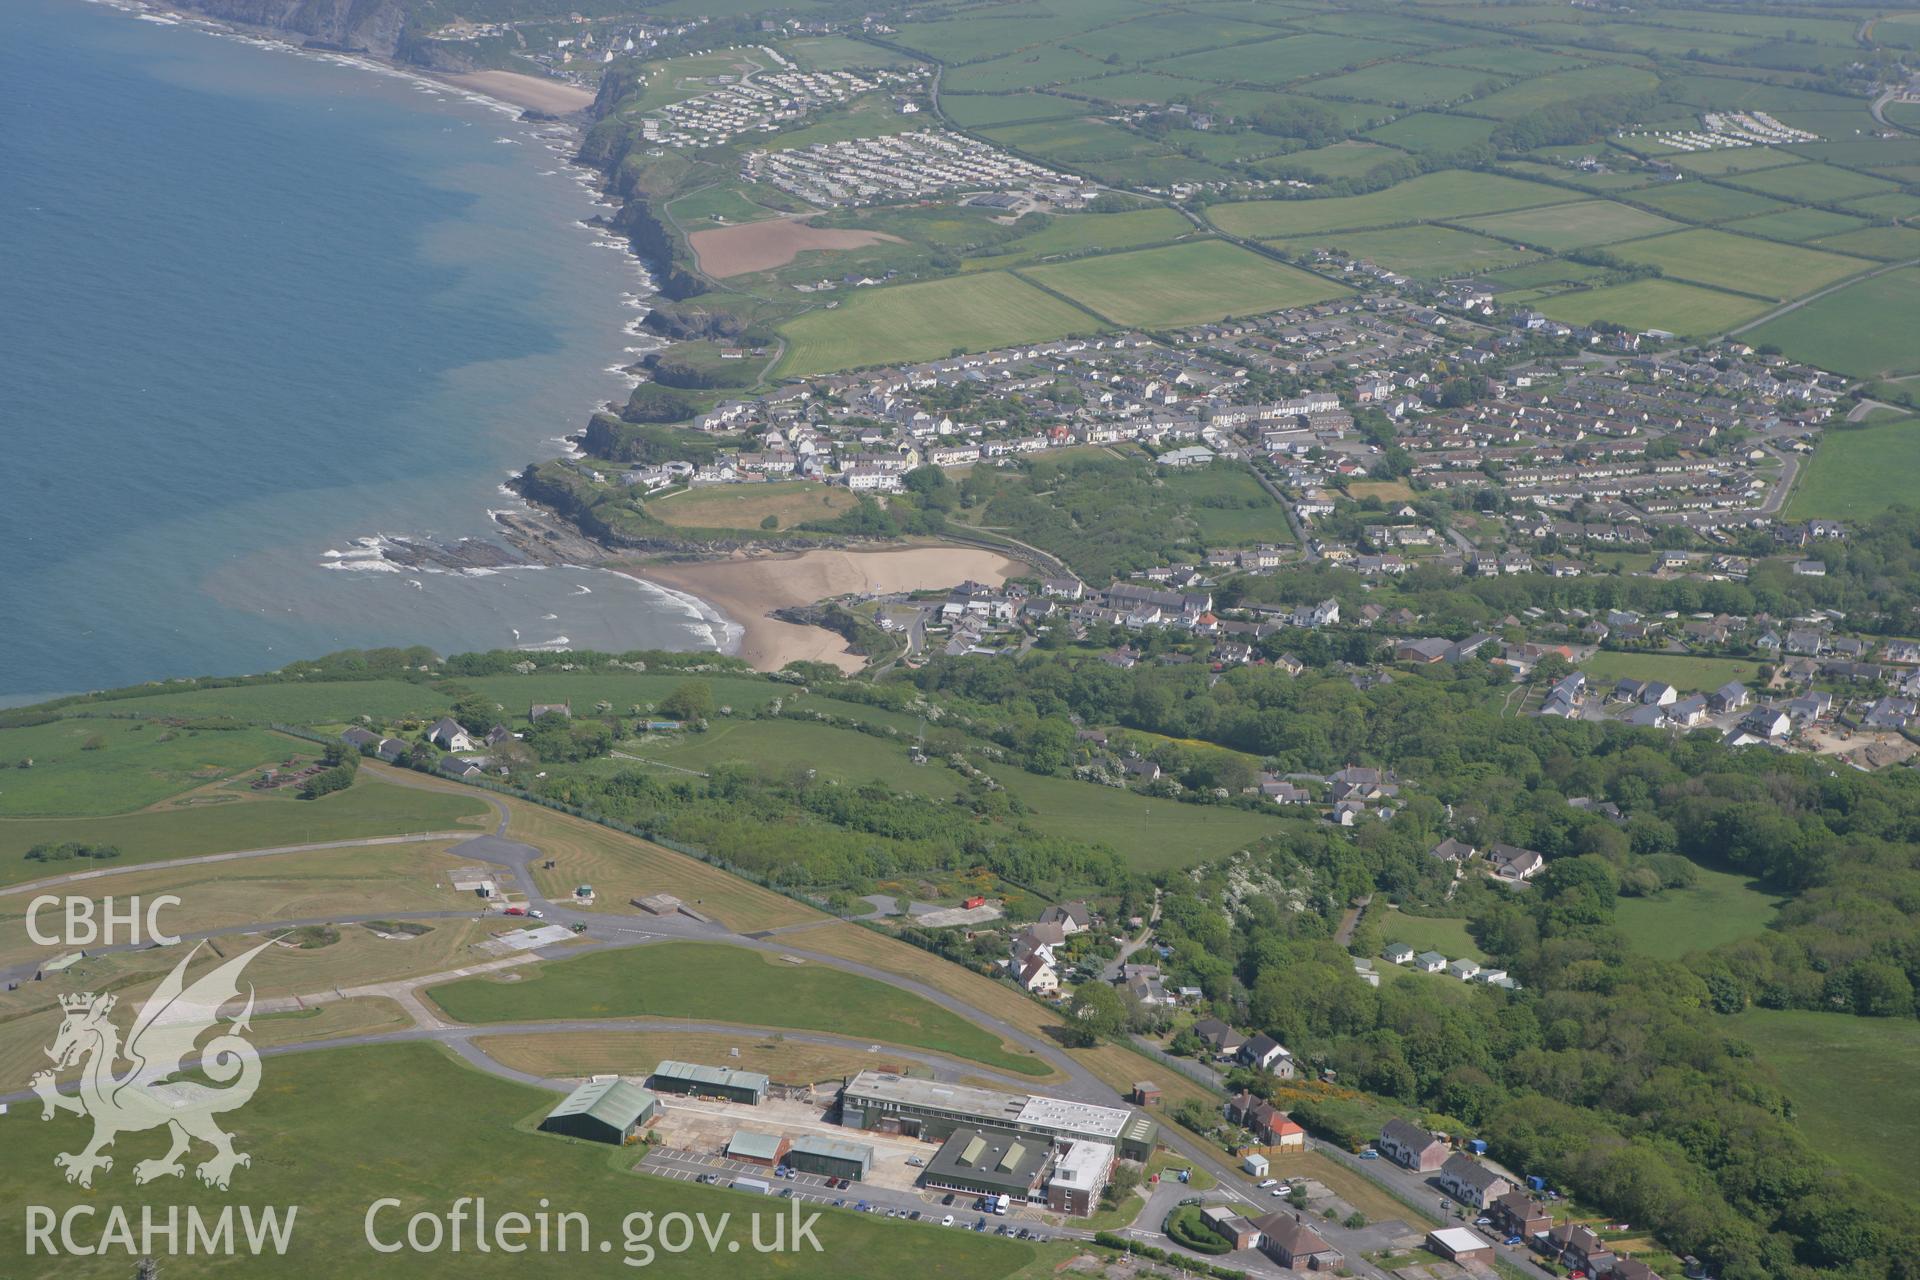 RCAHMW colour oblique photograph of Aberporth town, view from west. Taken by Toby Driver on 25/05/2010.